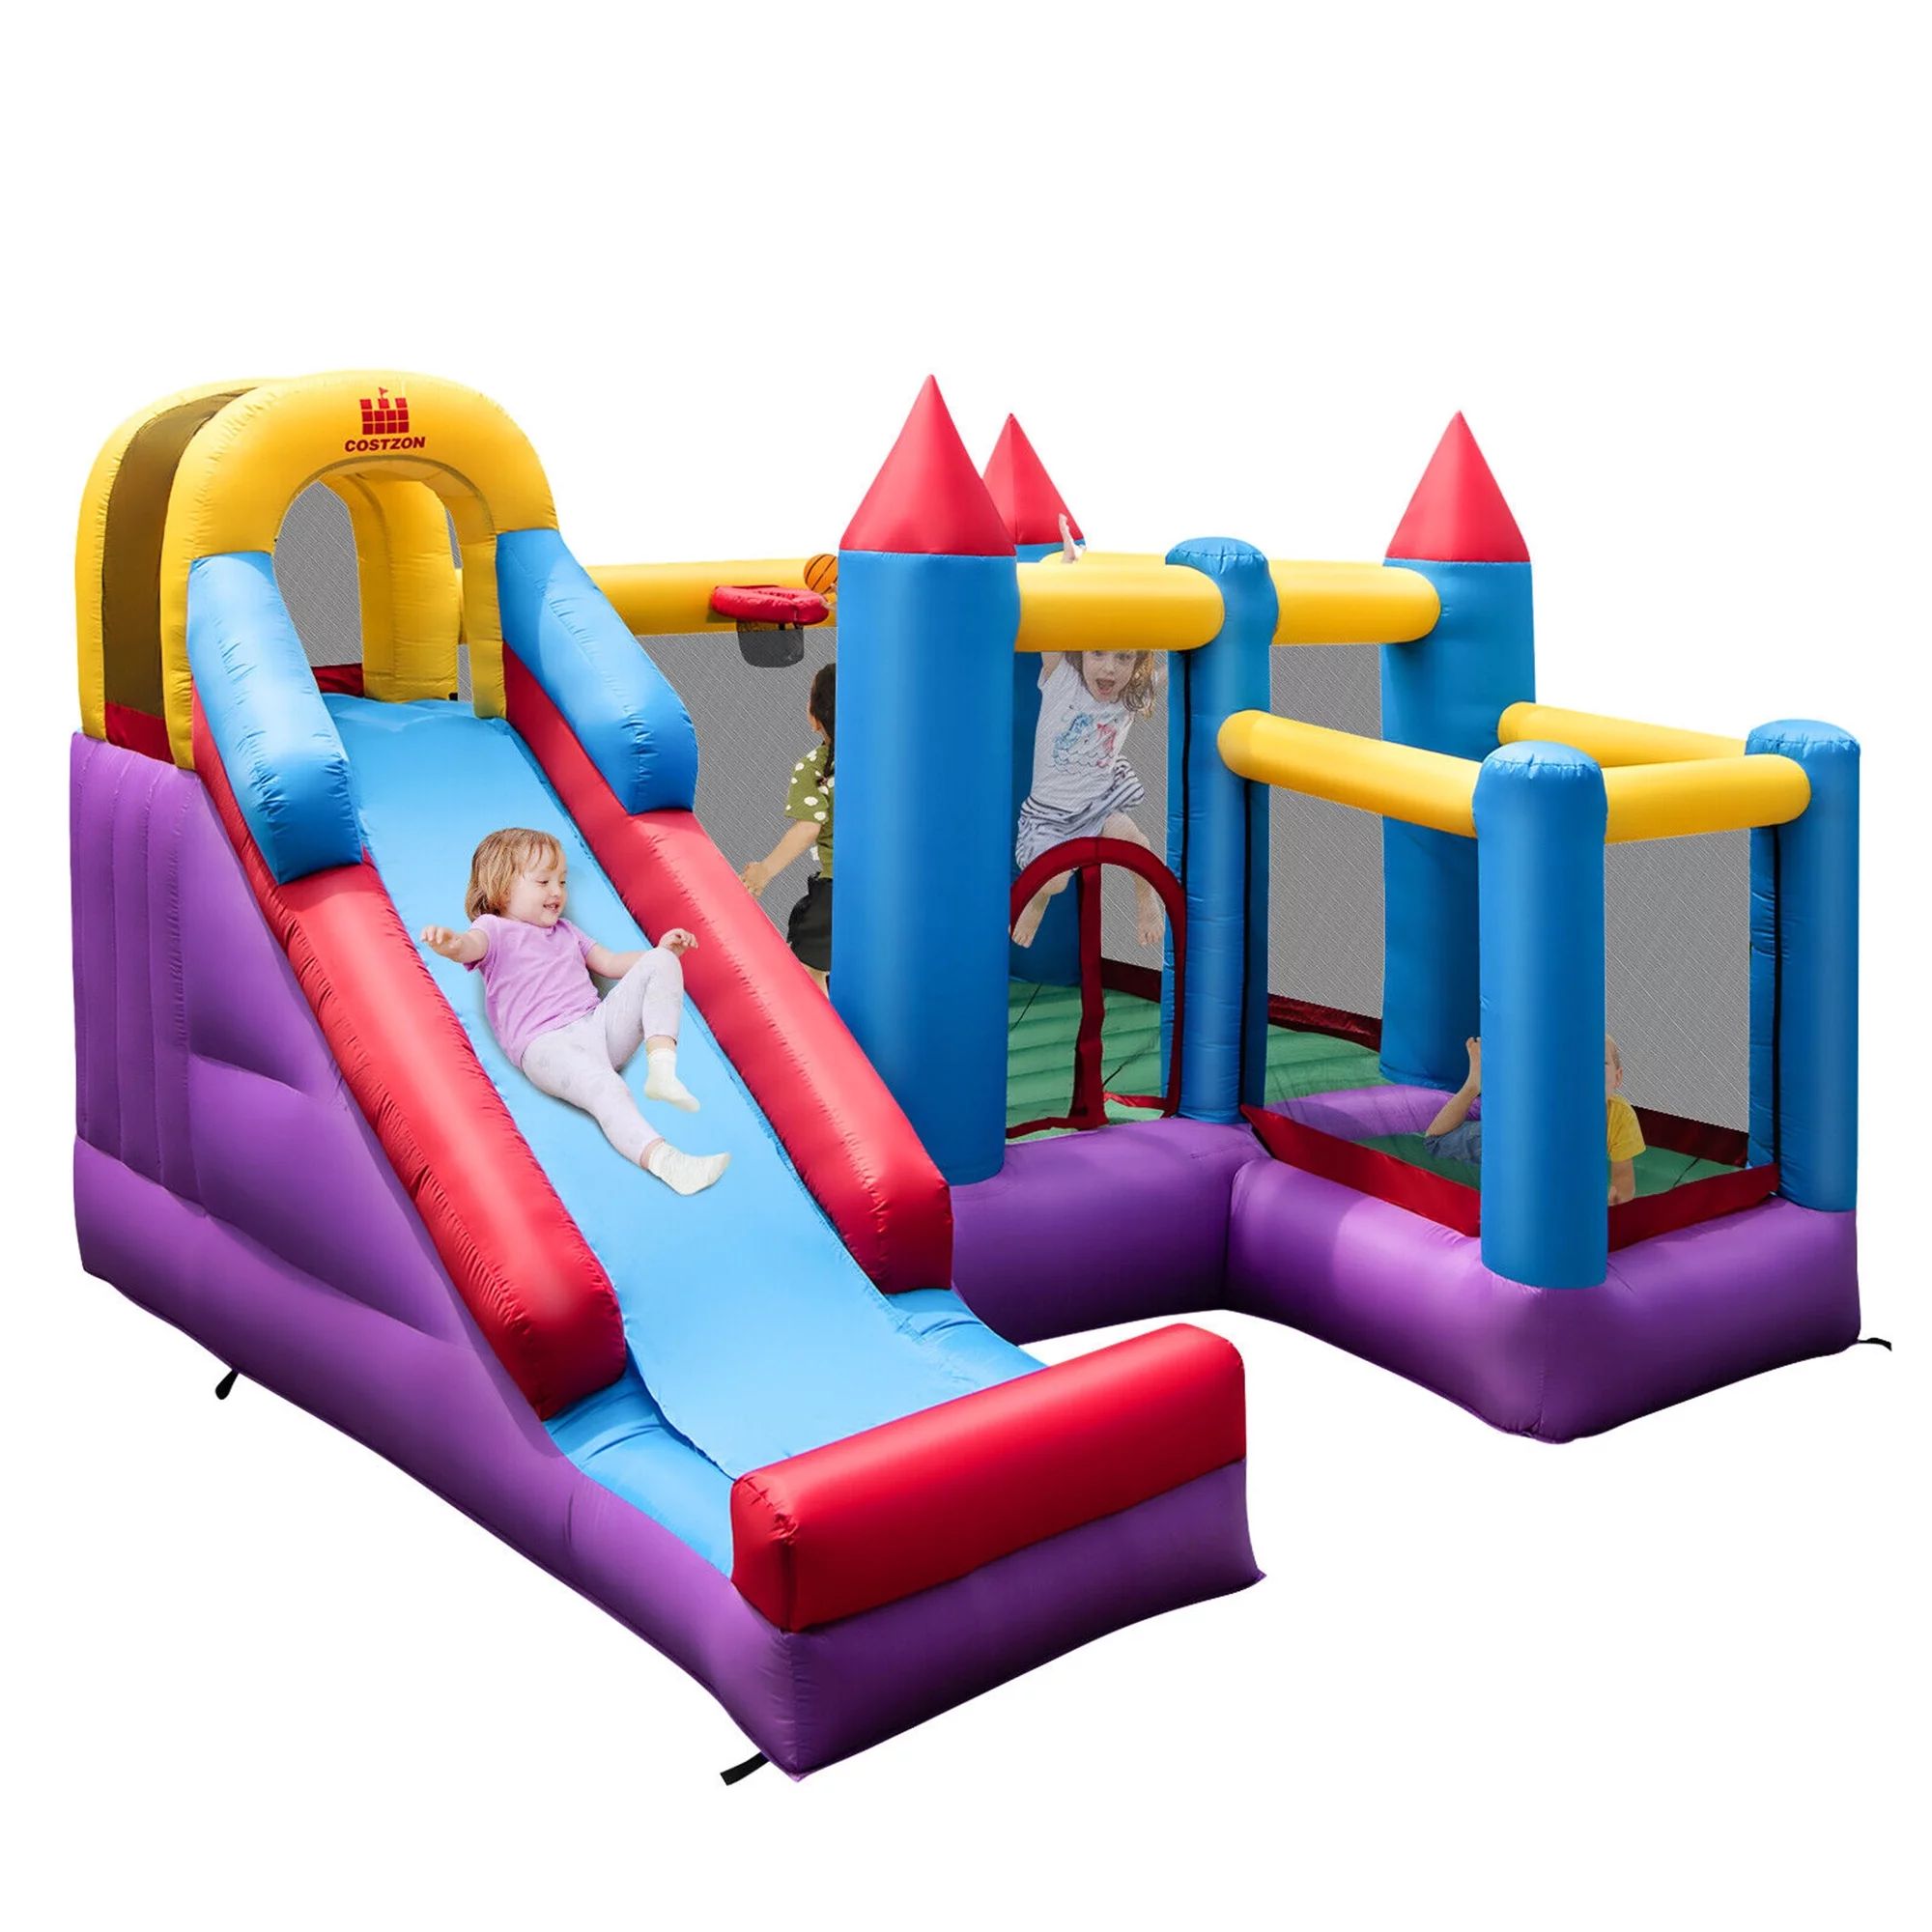 Gymax Inflatable Bounce House 5-in-1 Inflatable Bouncer Indoor & Outdoor Blower Excluded | Walmart (US)